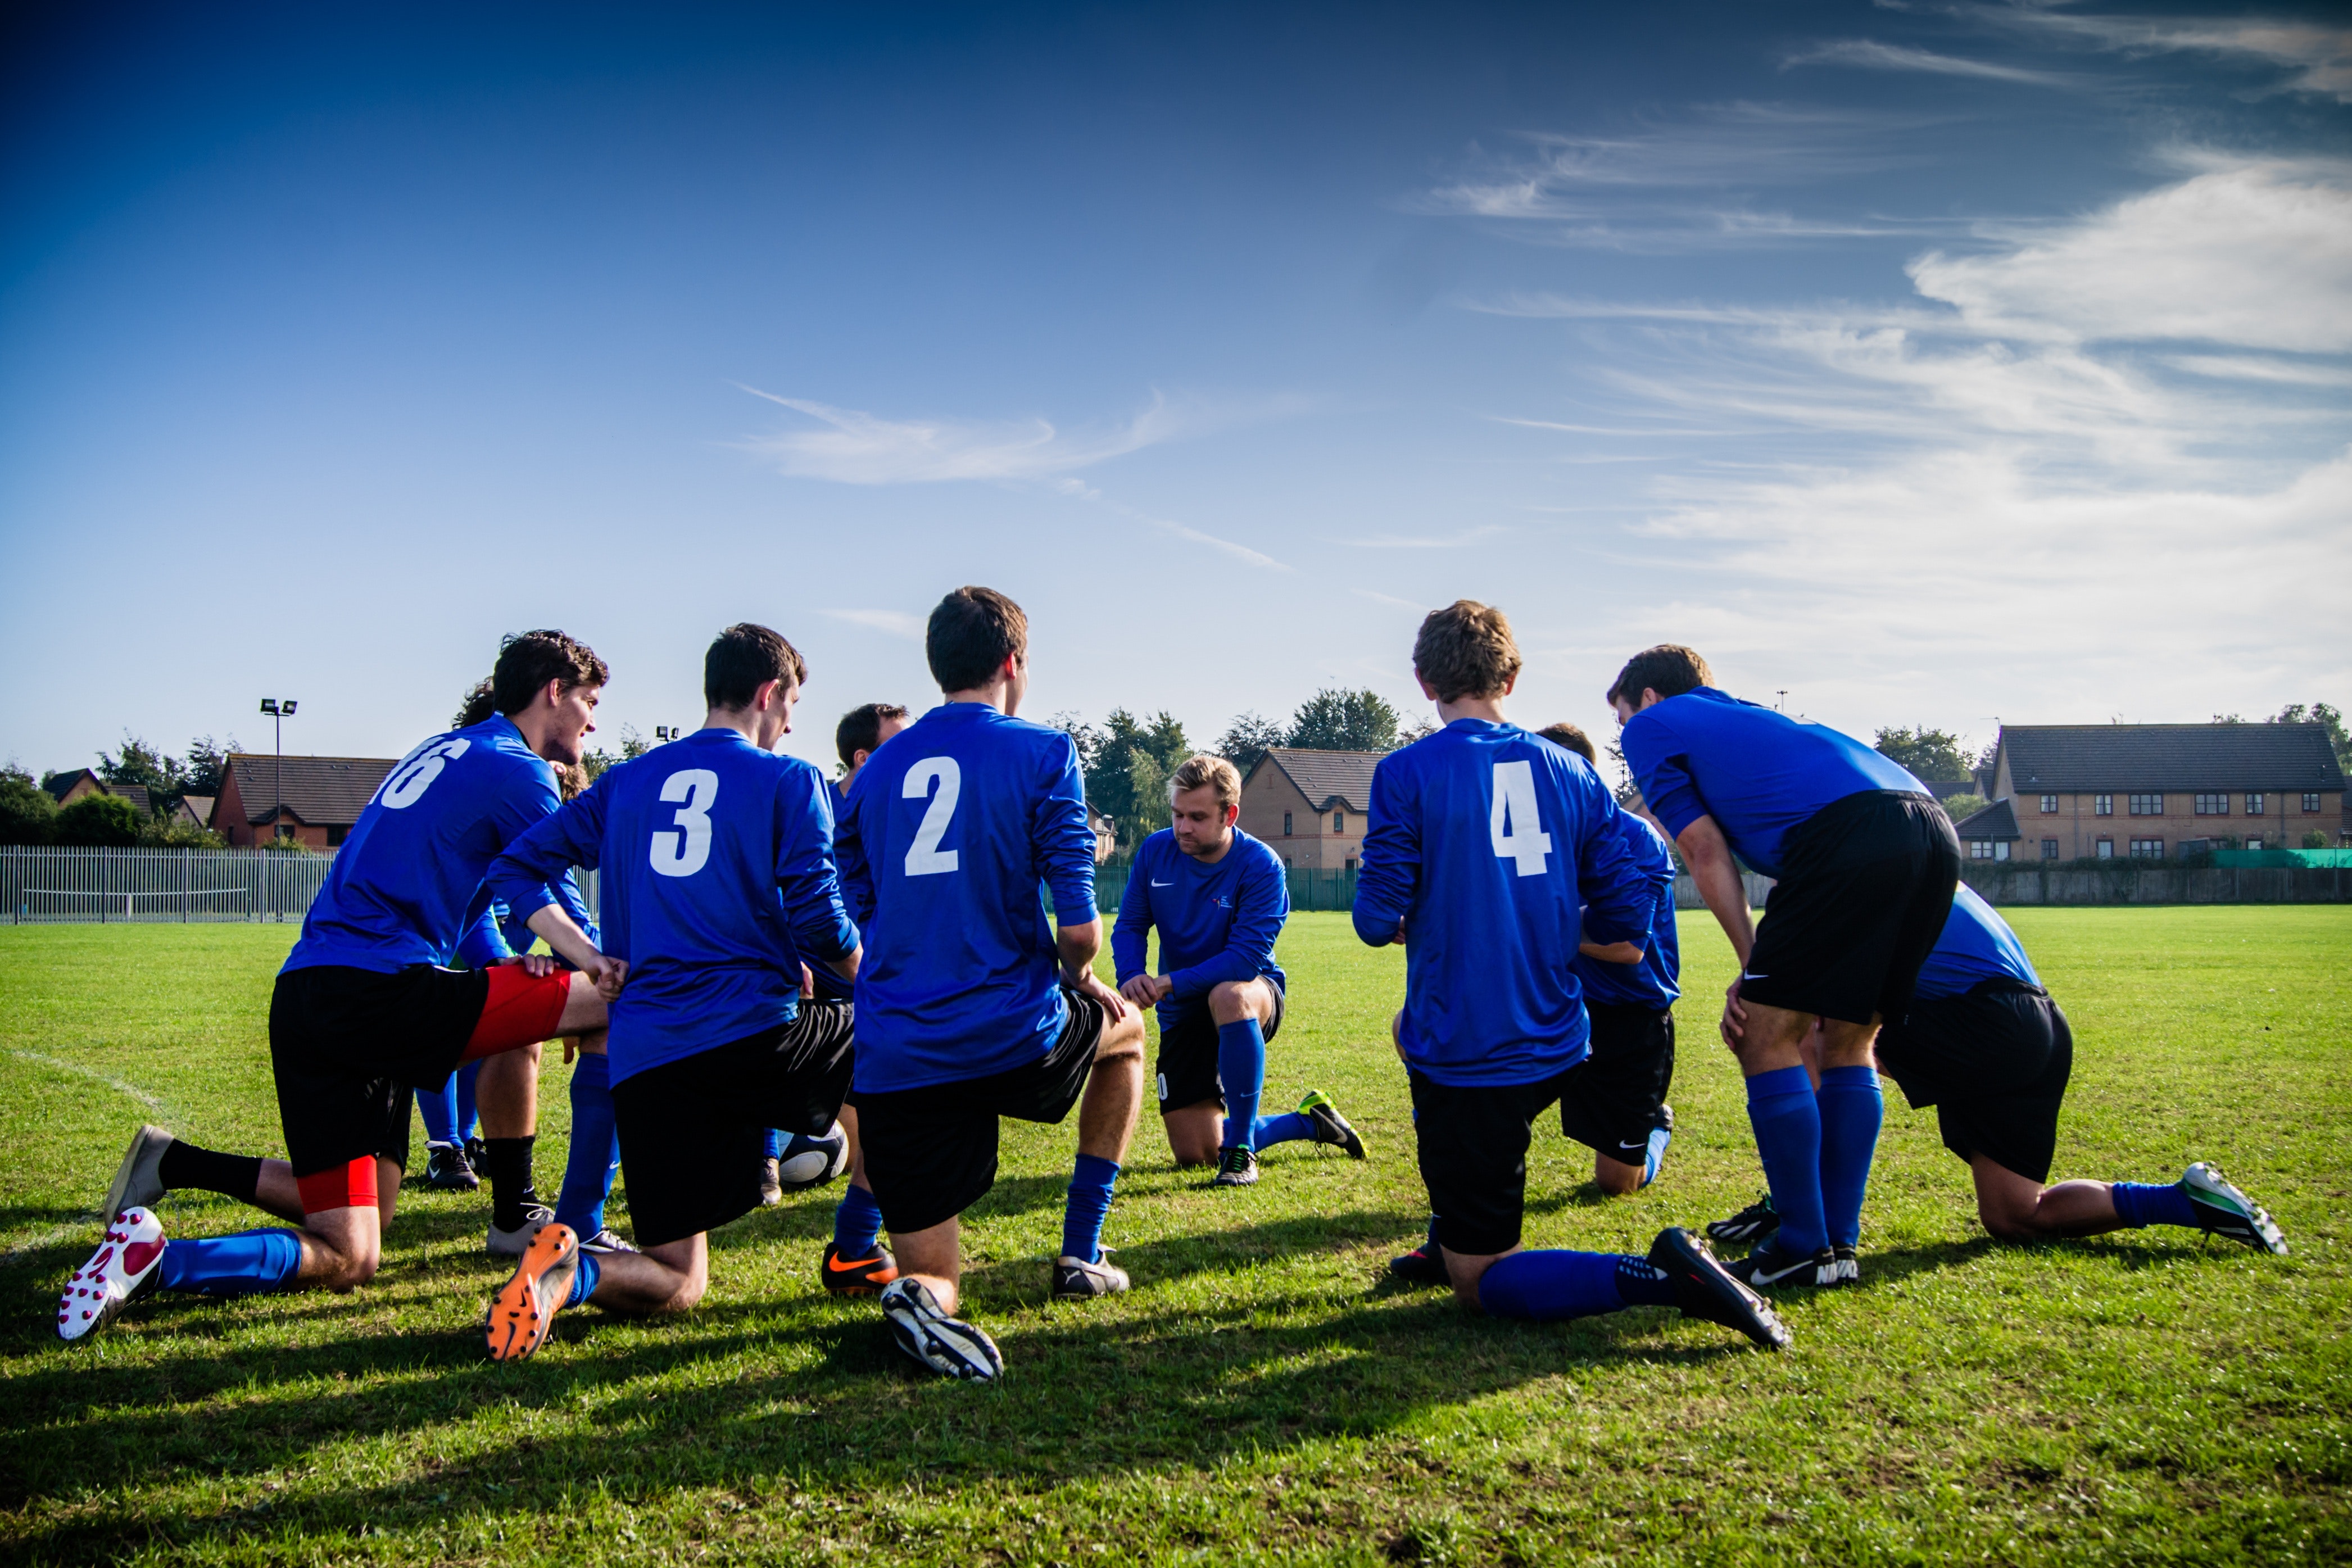 football insurance football club insurance football injury insurance Football team in blue team kit are on their knees talking about football insurance.